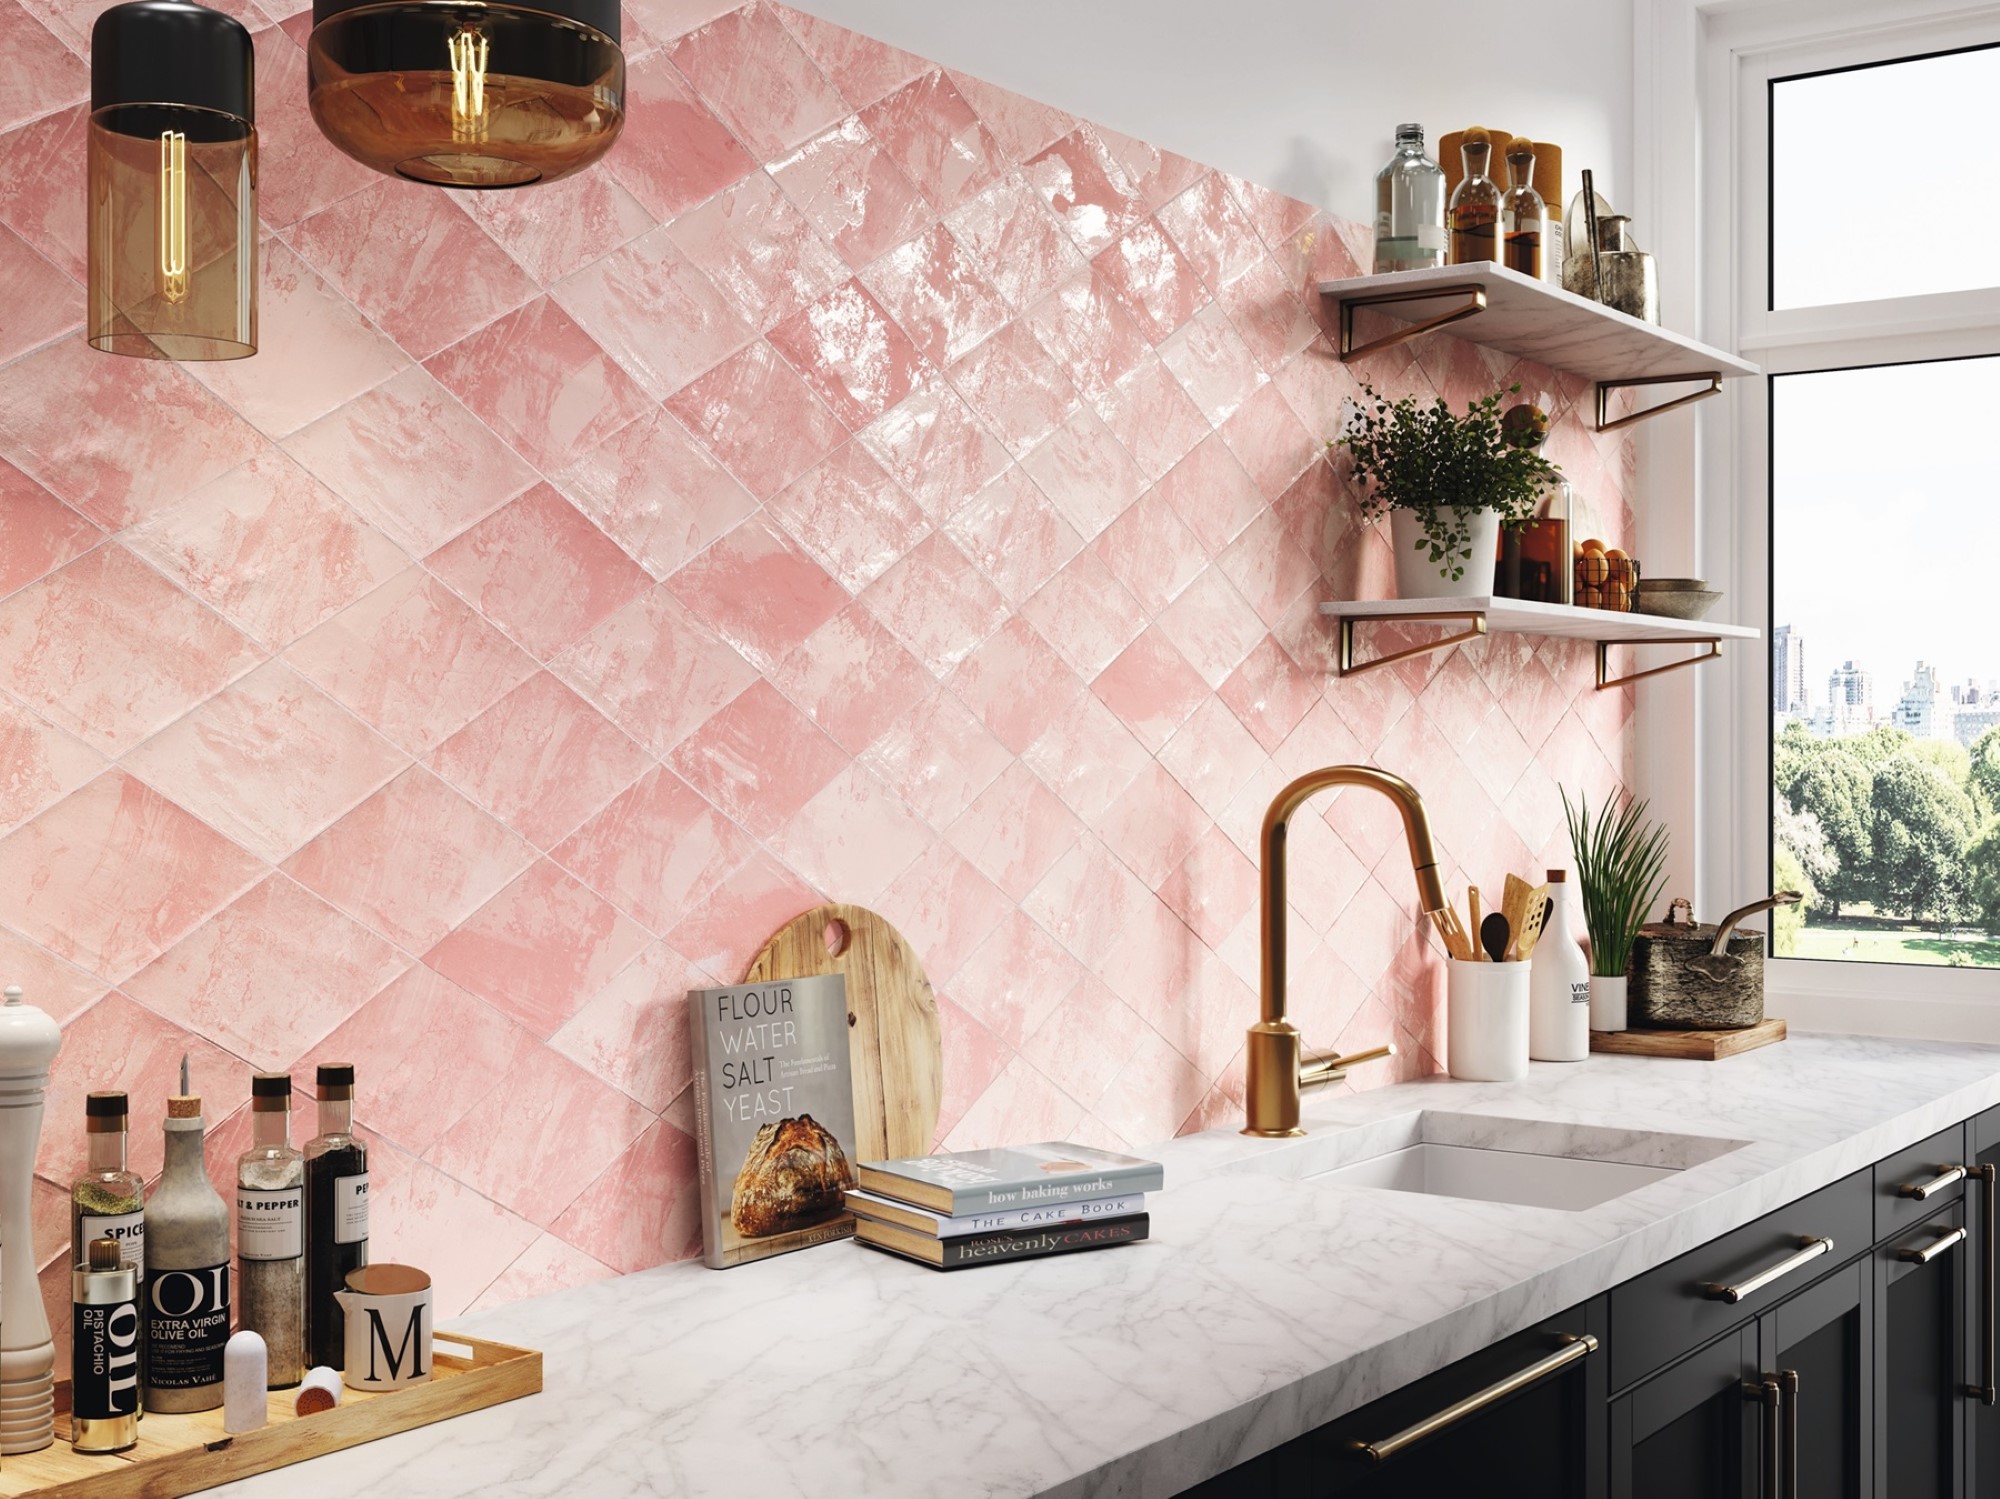 Pink tiles in a kitschy kitchen